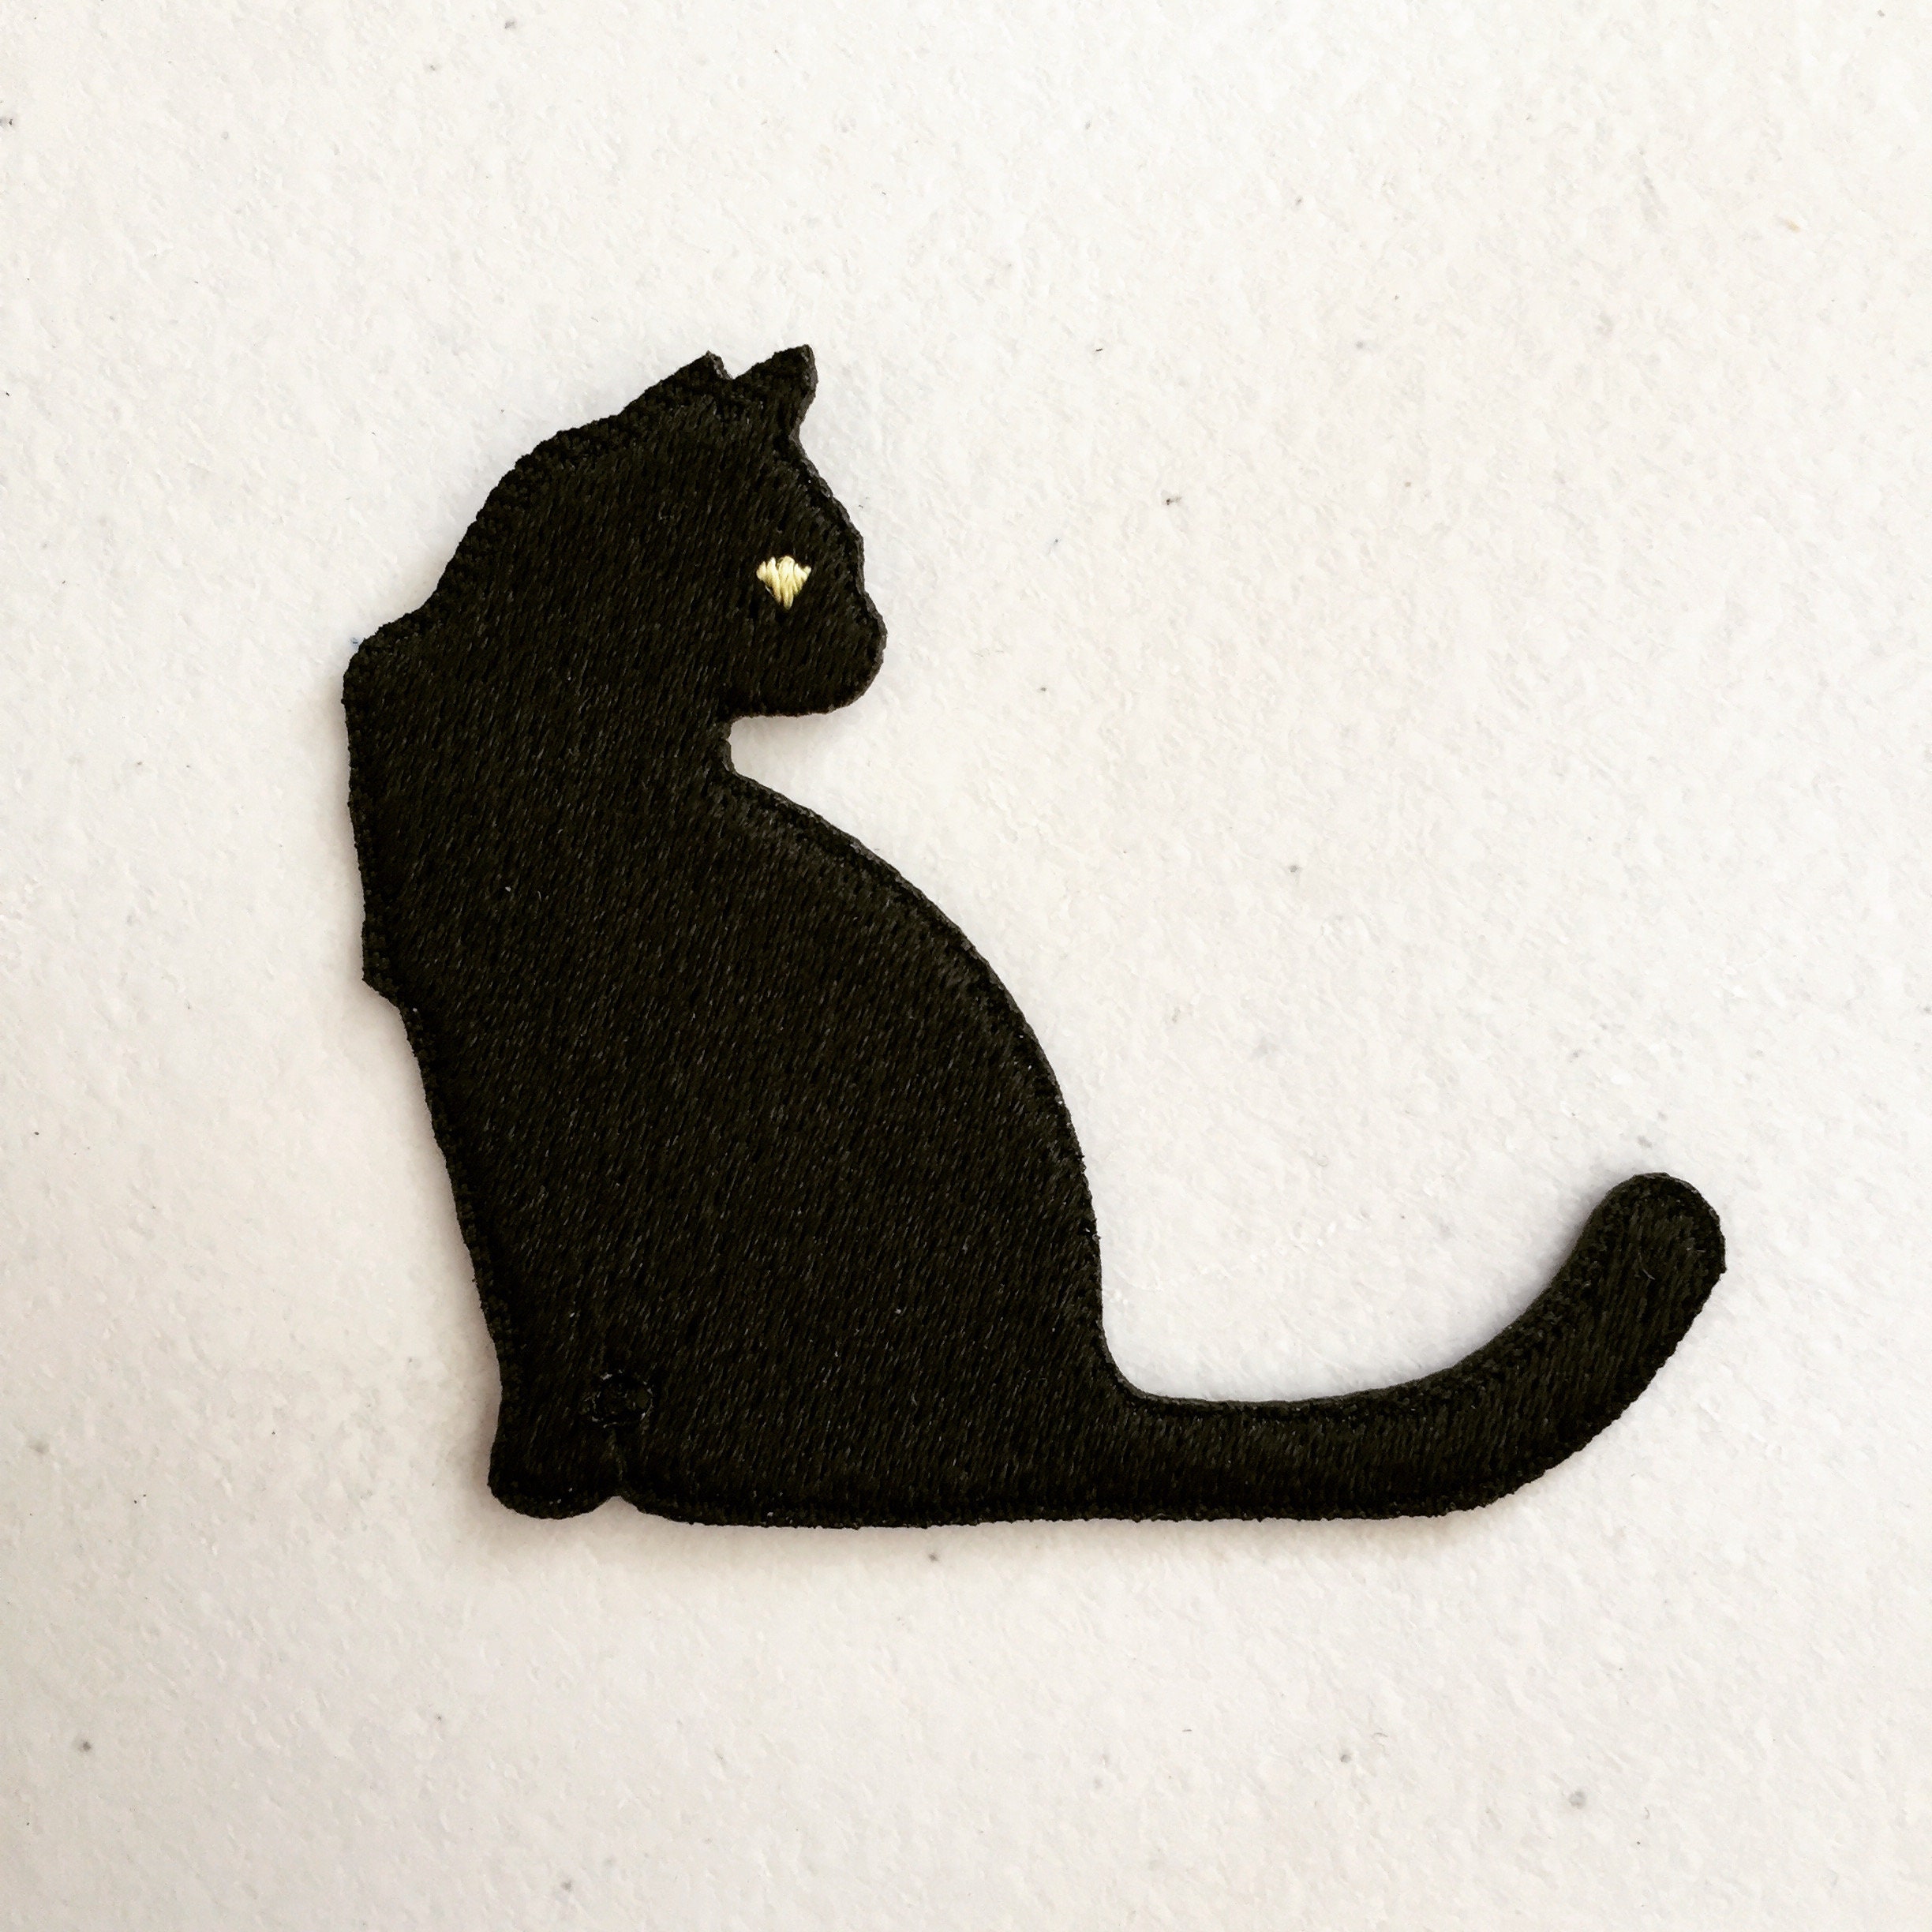 Cute Cat Clothing Embroidery Patches Animals Fabric Clothes Stickers DIY